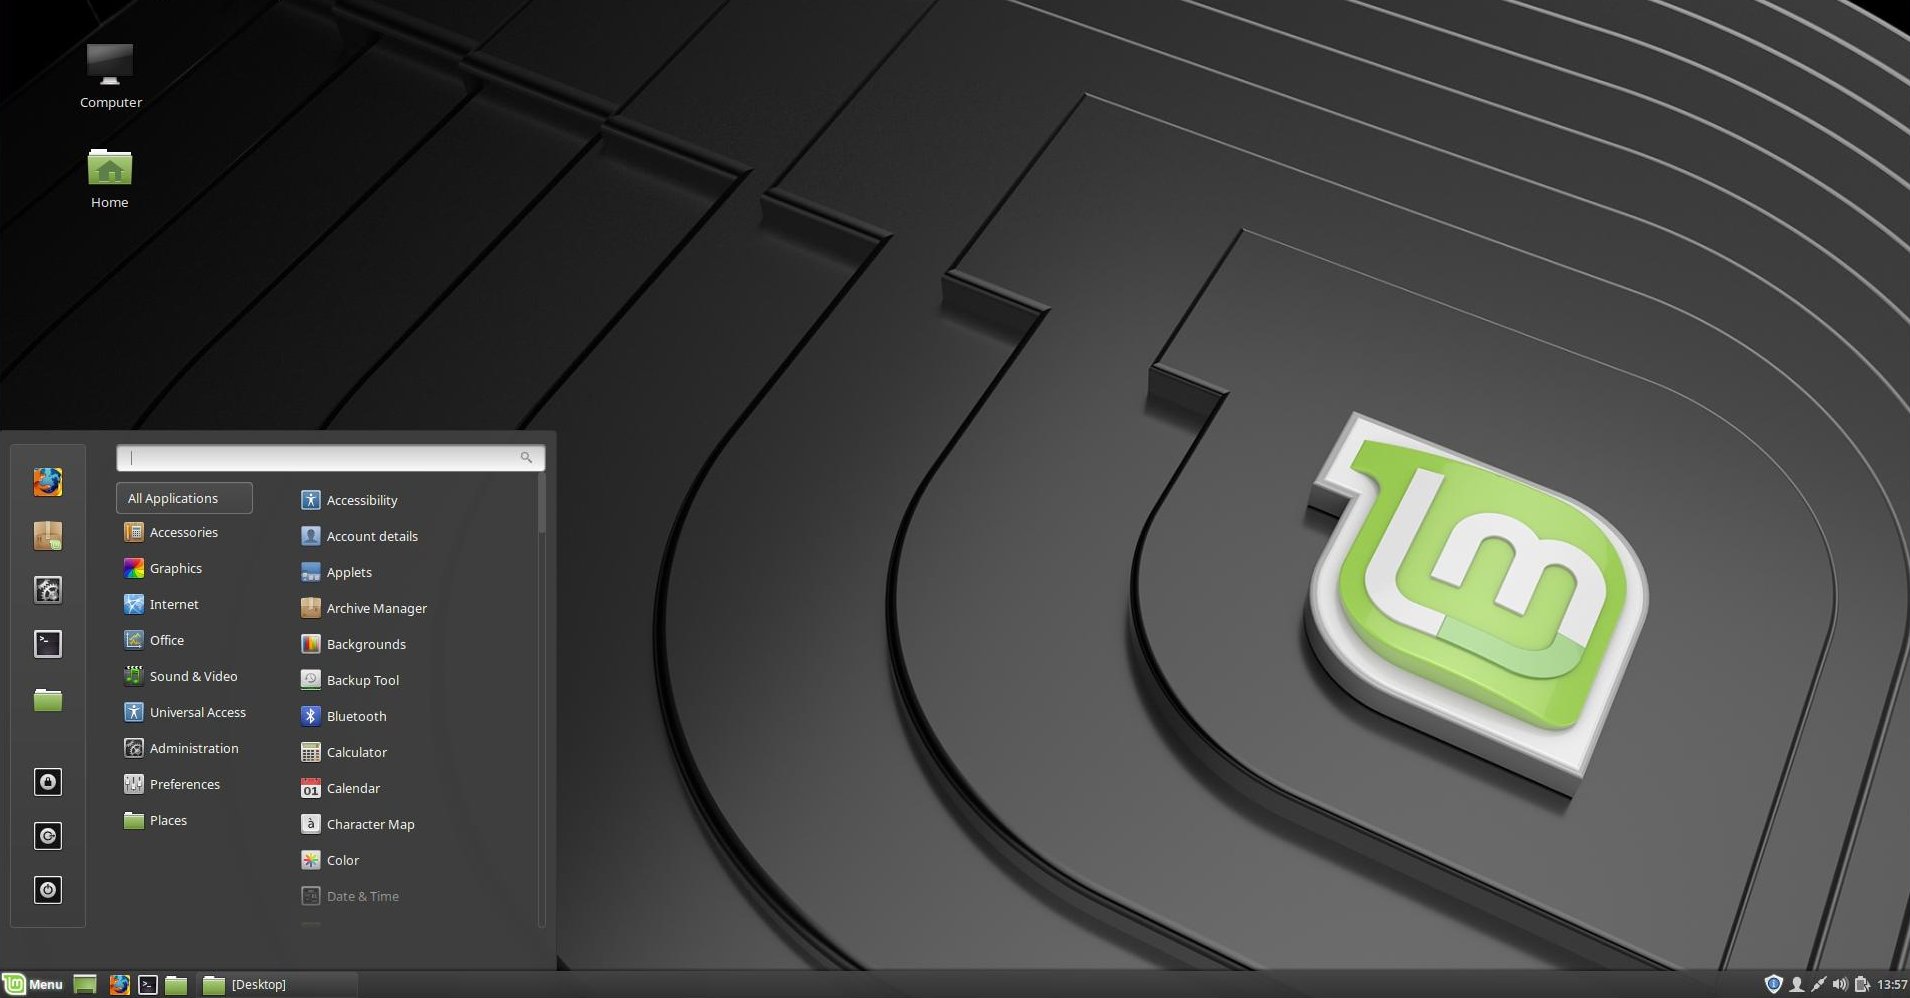 Red Linux Mint Wallpapers